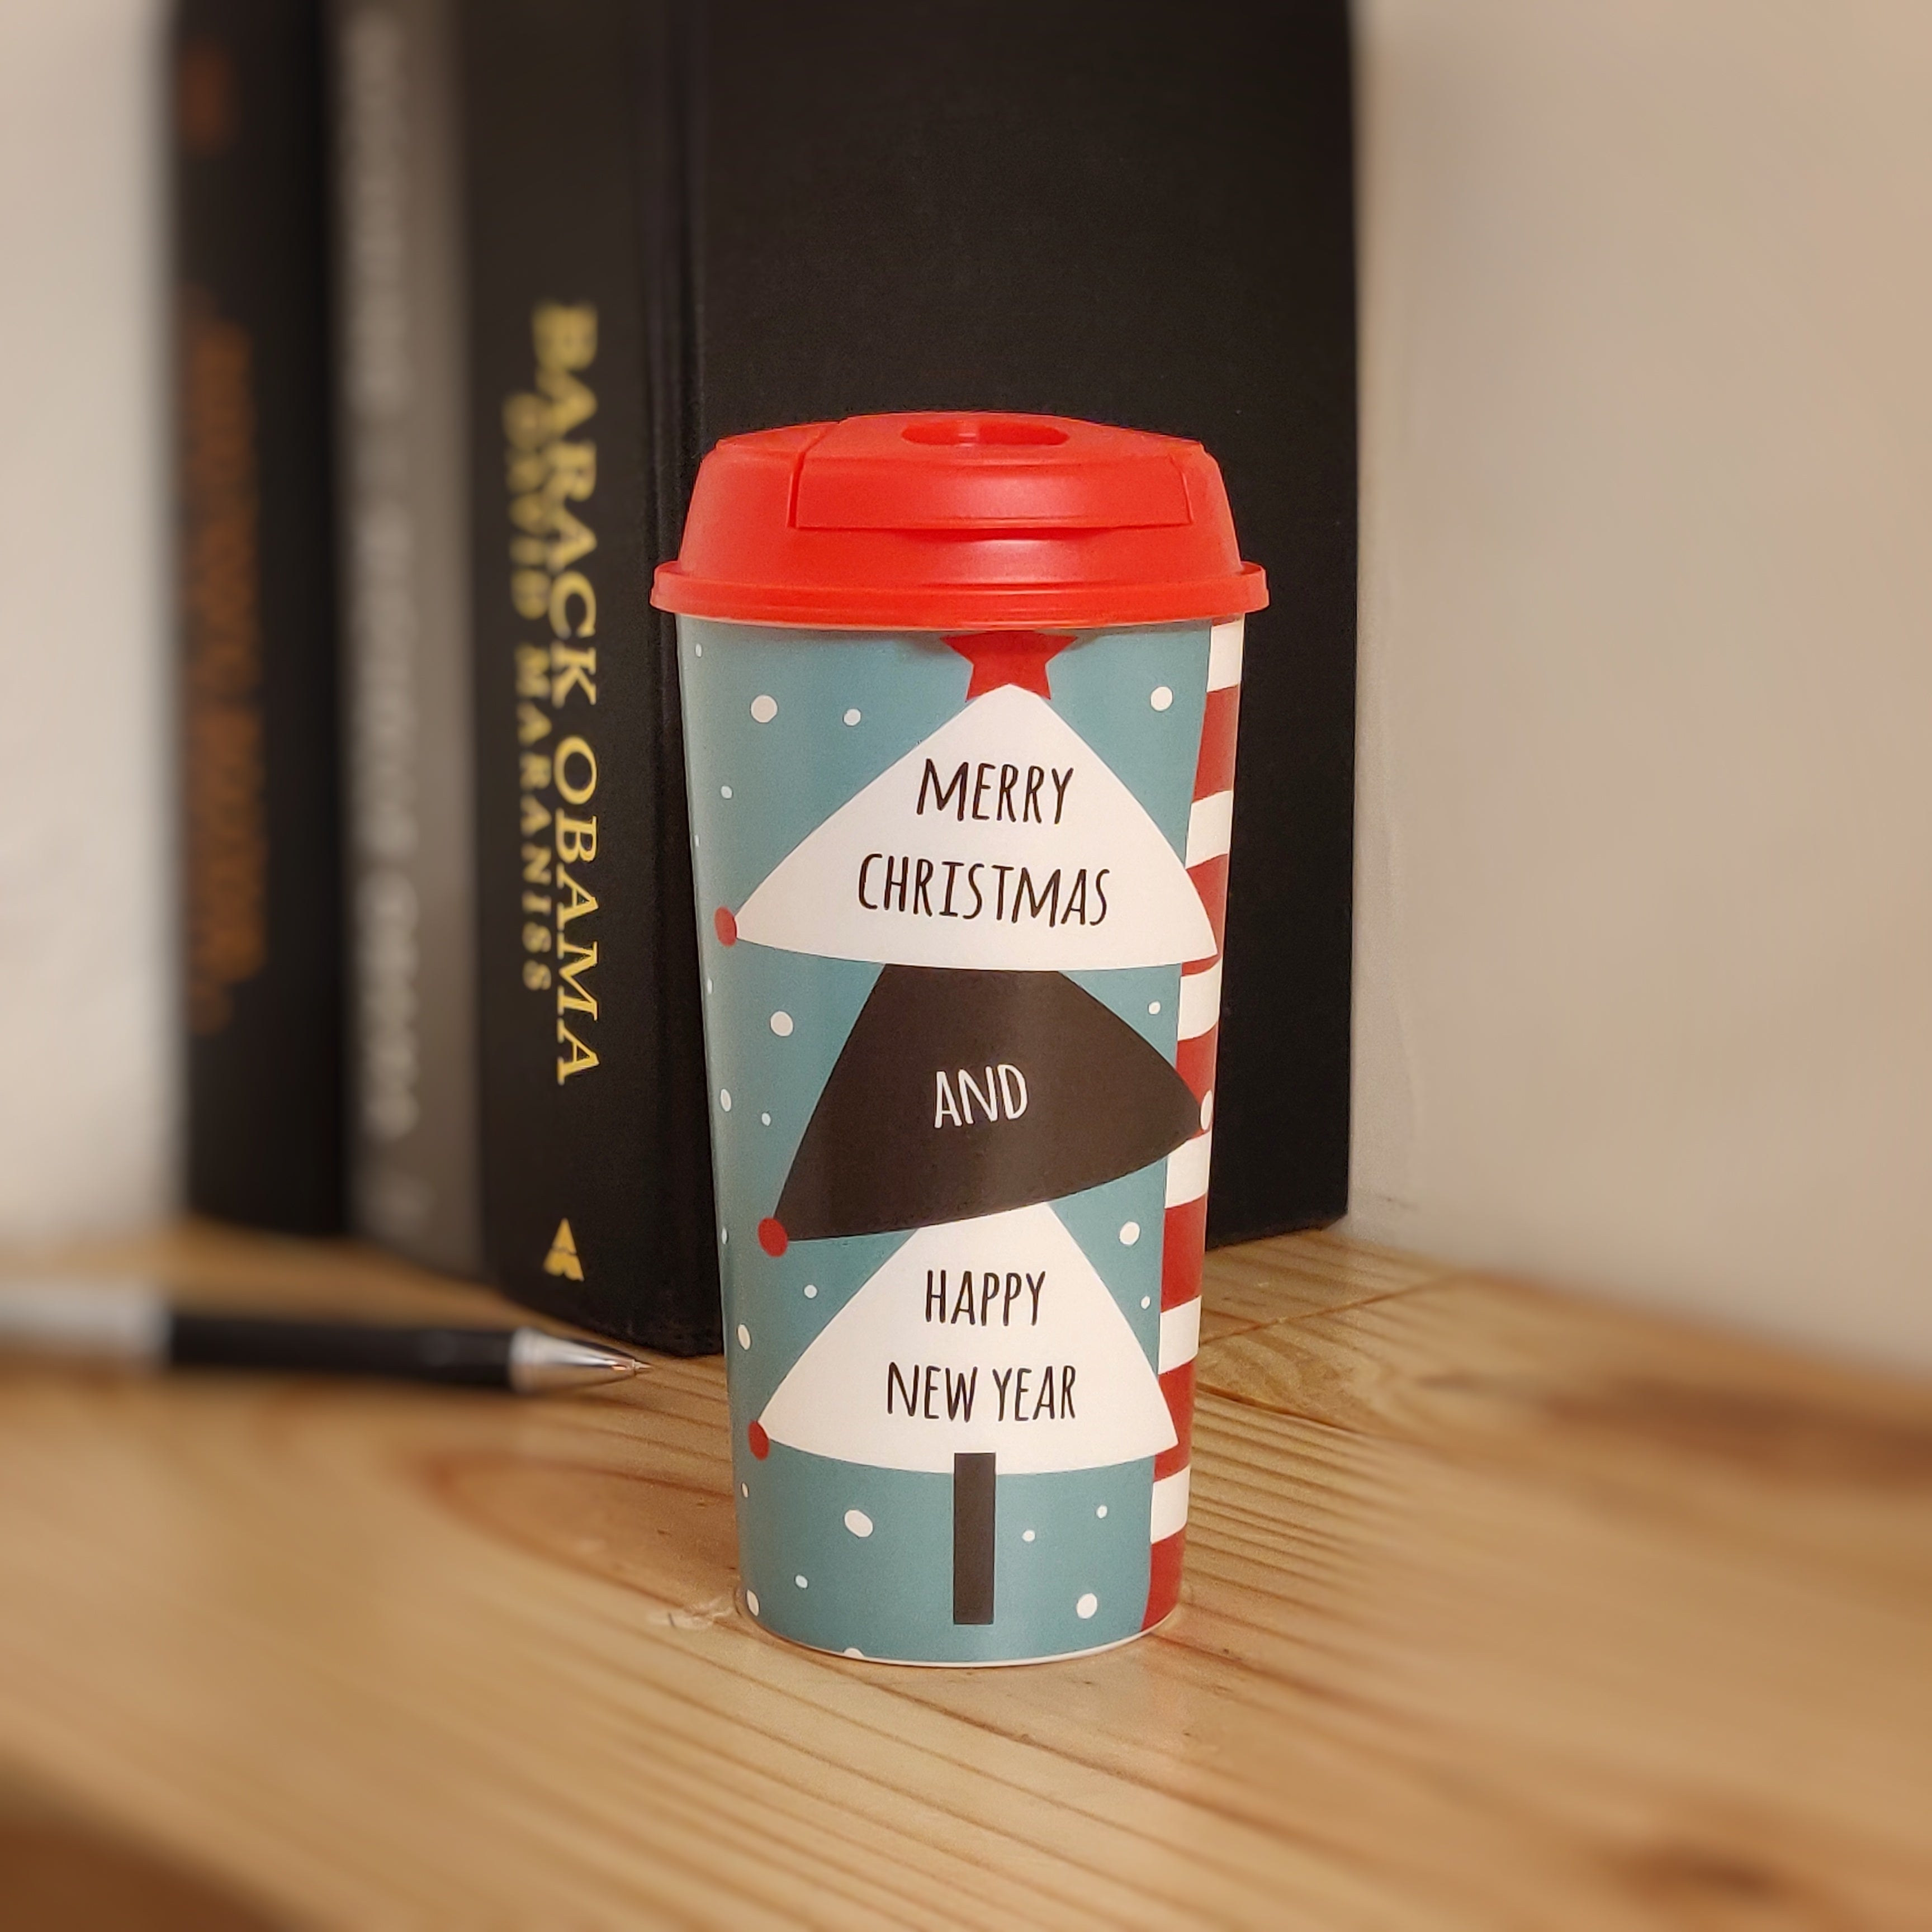 Designer cup Chirpy cups Christmas Coffee Cups Santa cups Coffee cups Sipper cup Coffee Sipper Travel Sipper Travel Coffee Cup On the go cups Sipper Online Buy Sipper Online Coffee Sipper Online Water Sipper Online gift for loved ones Christmas gift Happy New Year gift